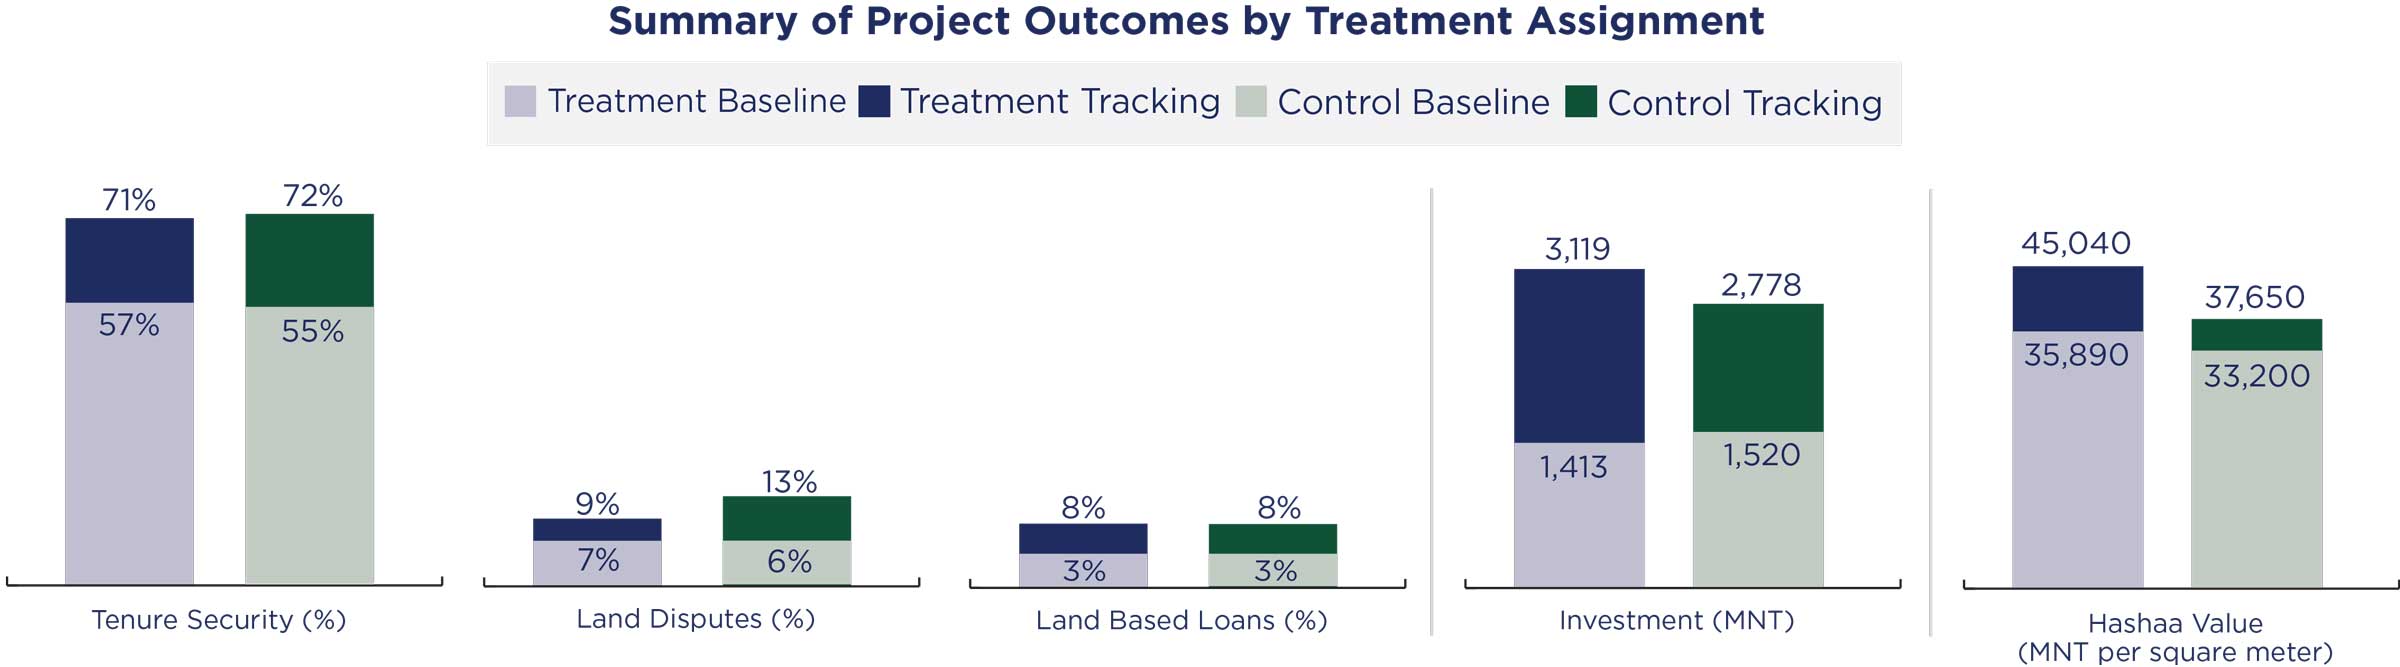 Summary of Project Outcomes by Treatment Assignment comparison chart